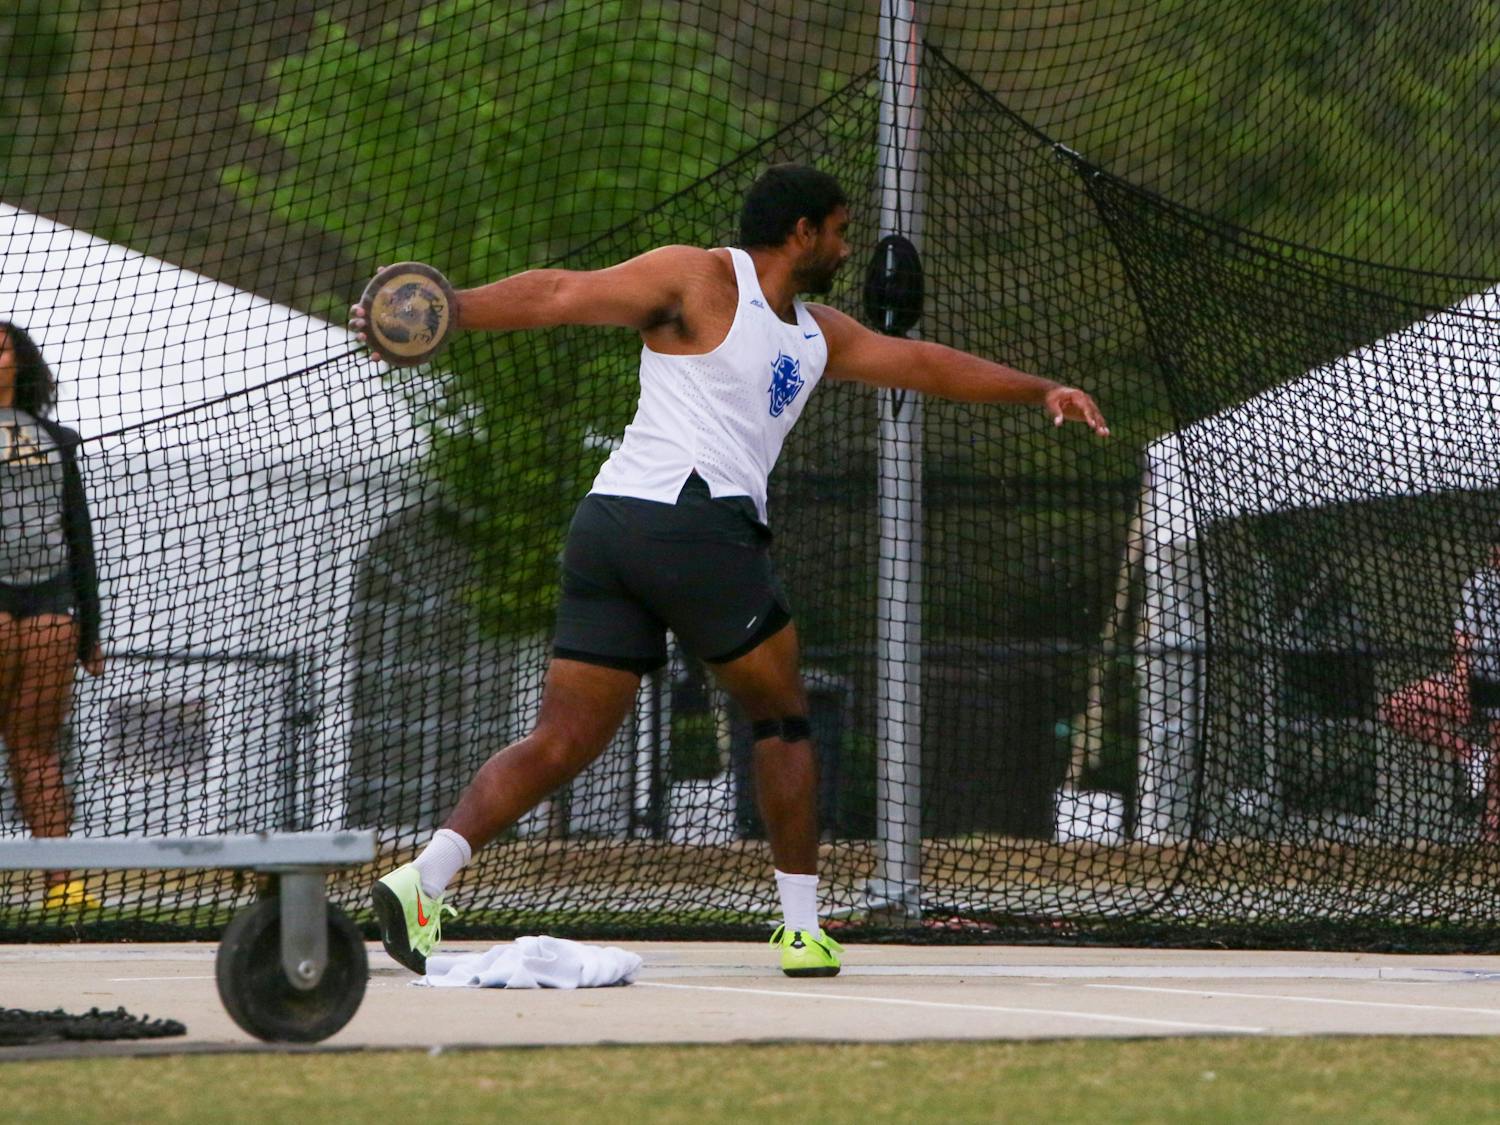 Duke's throwers were especially dominant at the Doc Hale Invitational.